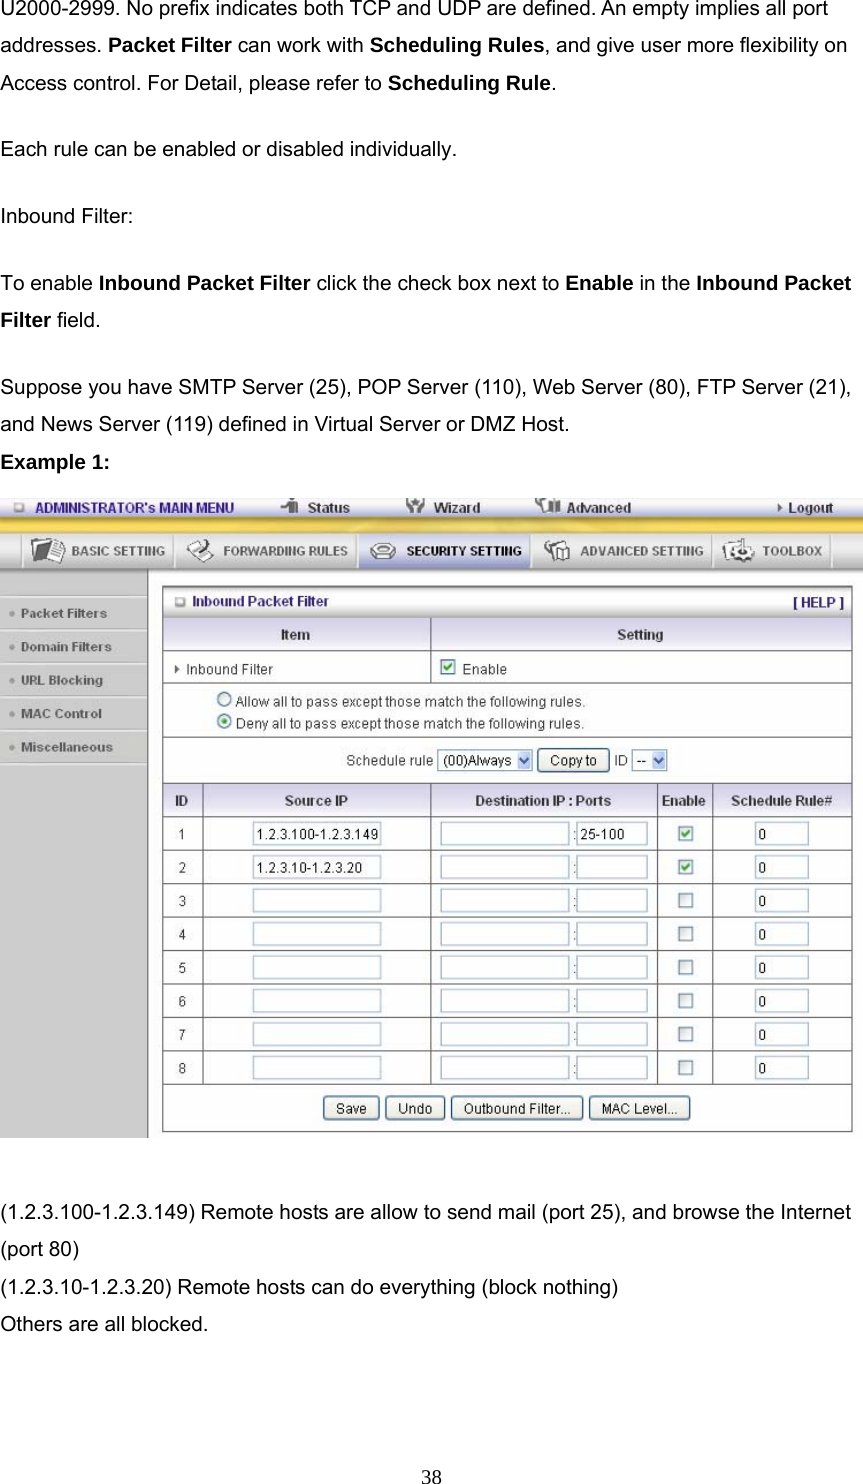  38U2000-2999. No prefix indicates both TCP and UDP are defined. An empty implies all port addresses. Packet Filter can work with Scheduling Rules, and give user more flexibility on Access control. For Detail, please refer to Scheduling Rule. Each rule can be enabled or disabled individually. Inbound Filter:   To enable Inbound Packet Filter click the check box next to Enable in the Inbound Packet Filter field. Suppose you have SMTP Server (25), POP Server (110), Web Server (80), FTP Server (21), and News Server (119) defined in Virtual Server or DMZ Host. Example 1:   (1.2.3.100-1.2.3.149) Remote hosts are allow to send mail (port 25), and browse the Internet (port 80) (1.2.3.10-1.2.3.20) Remote hosts can do everything (block nothing)   Others are all blocked.   